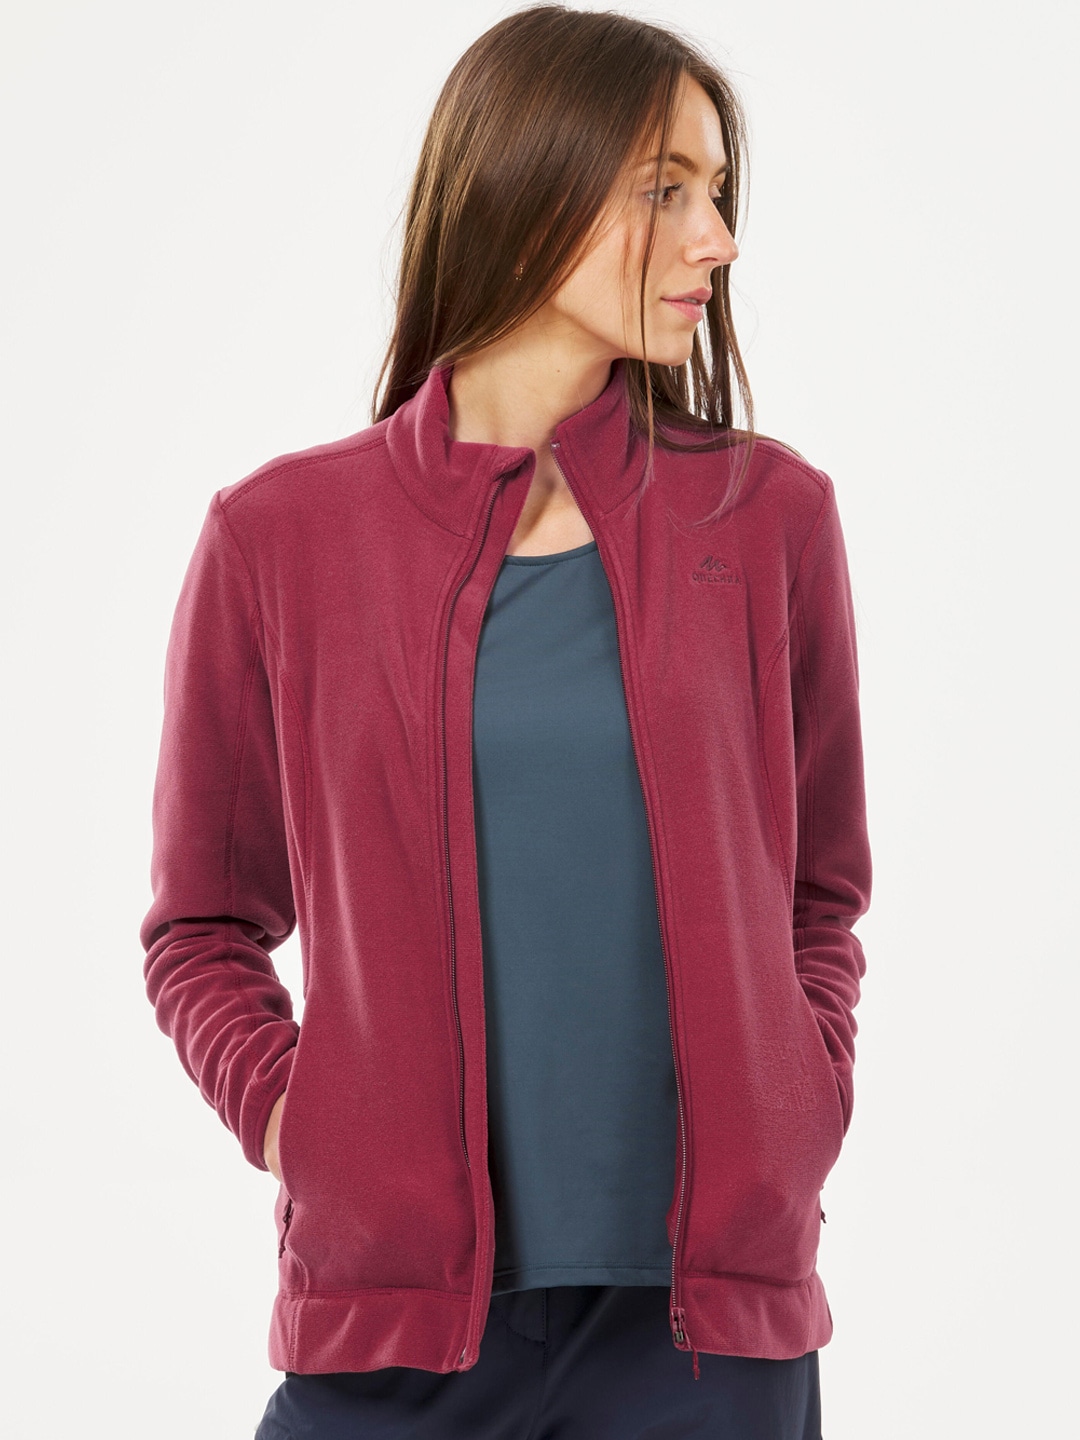 Quechua By Decathlon Women Red Solid Polyester Hiking Fleece Jacket Price  in India, Full Specifications & Offers